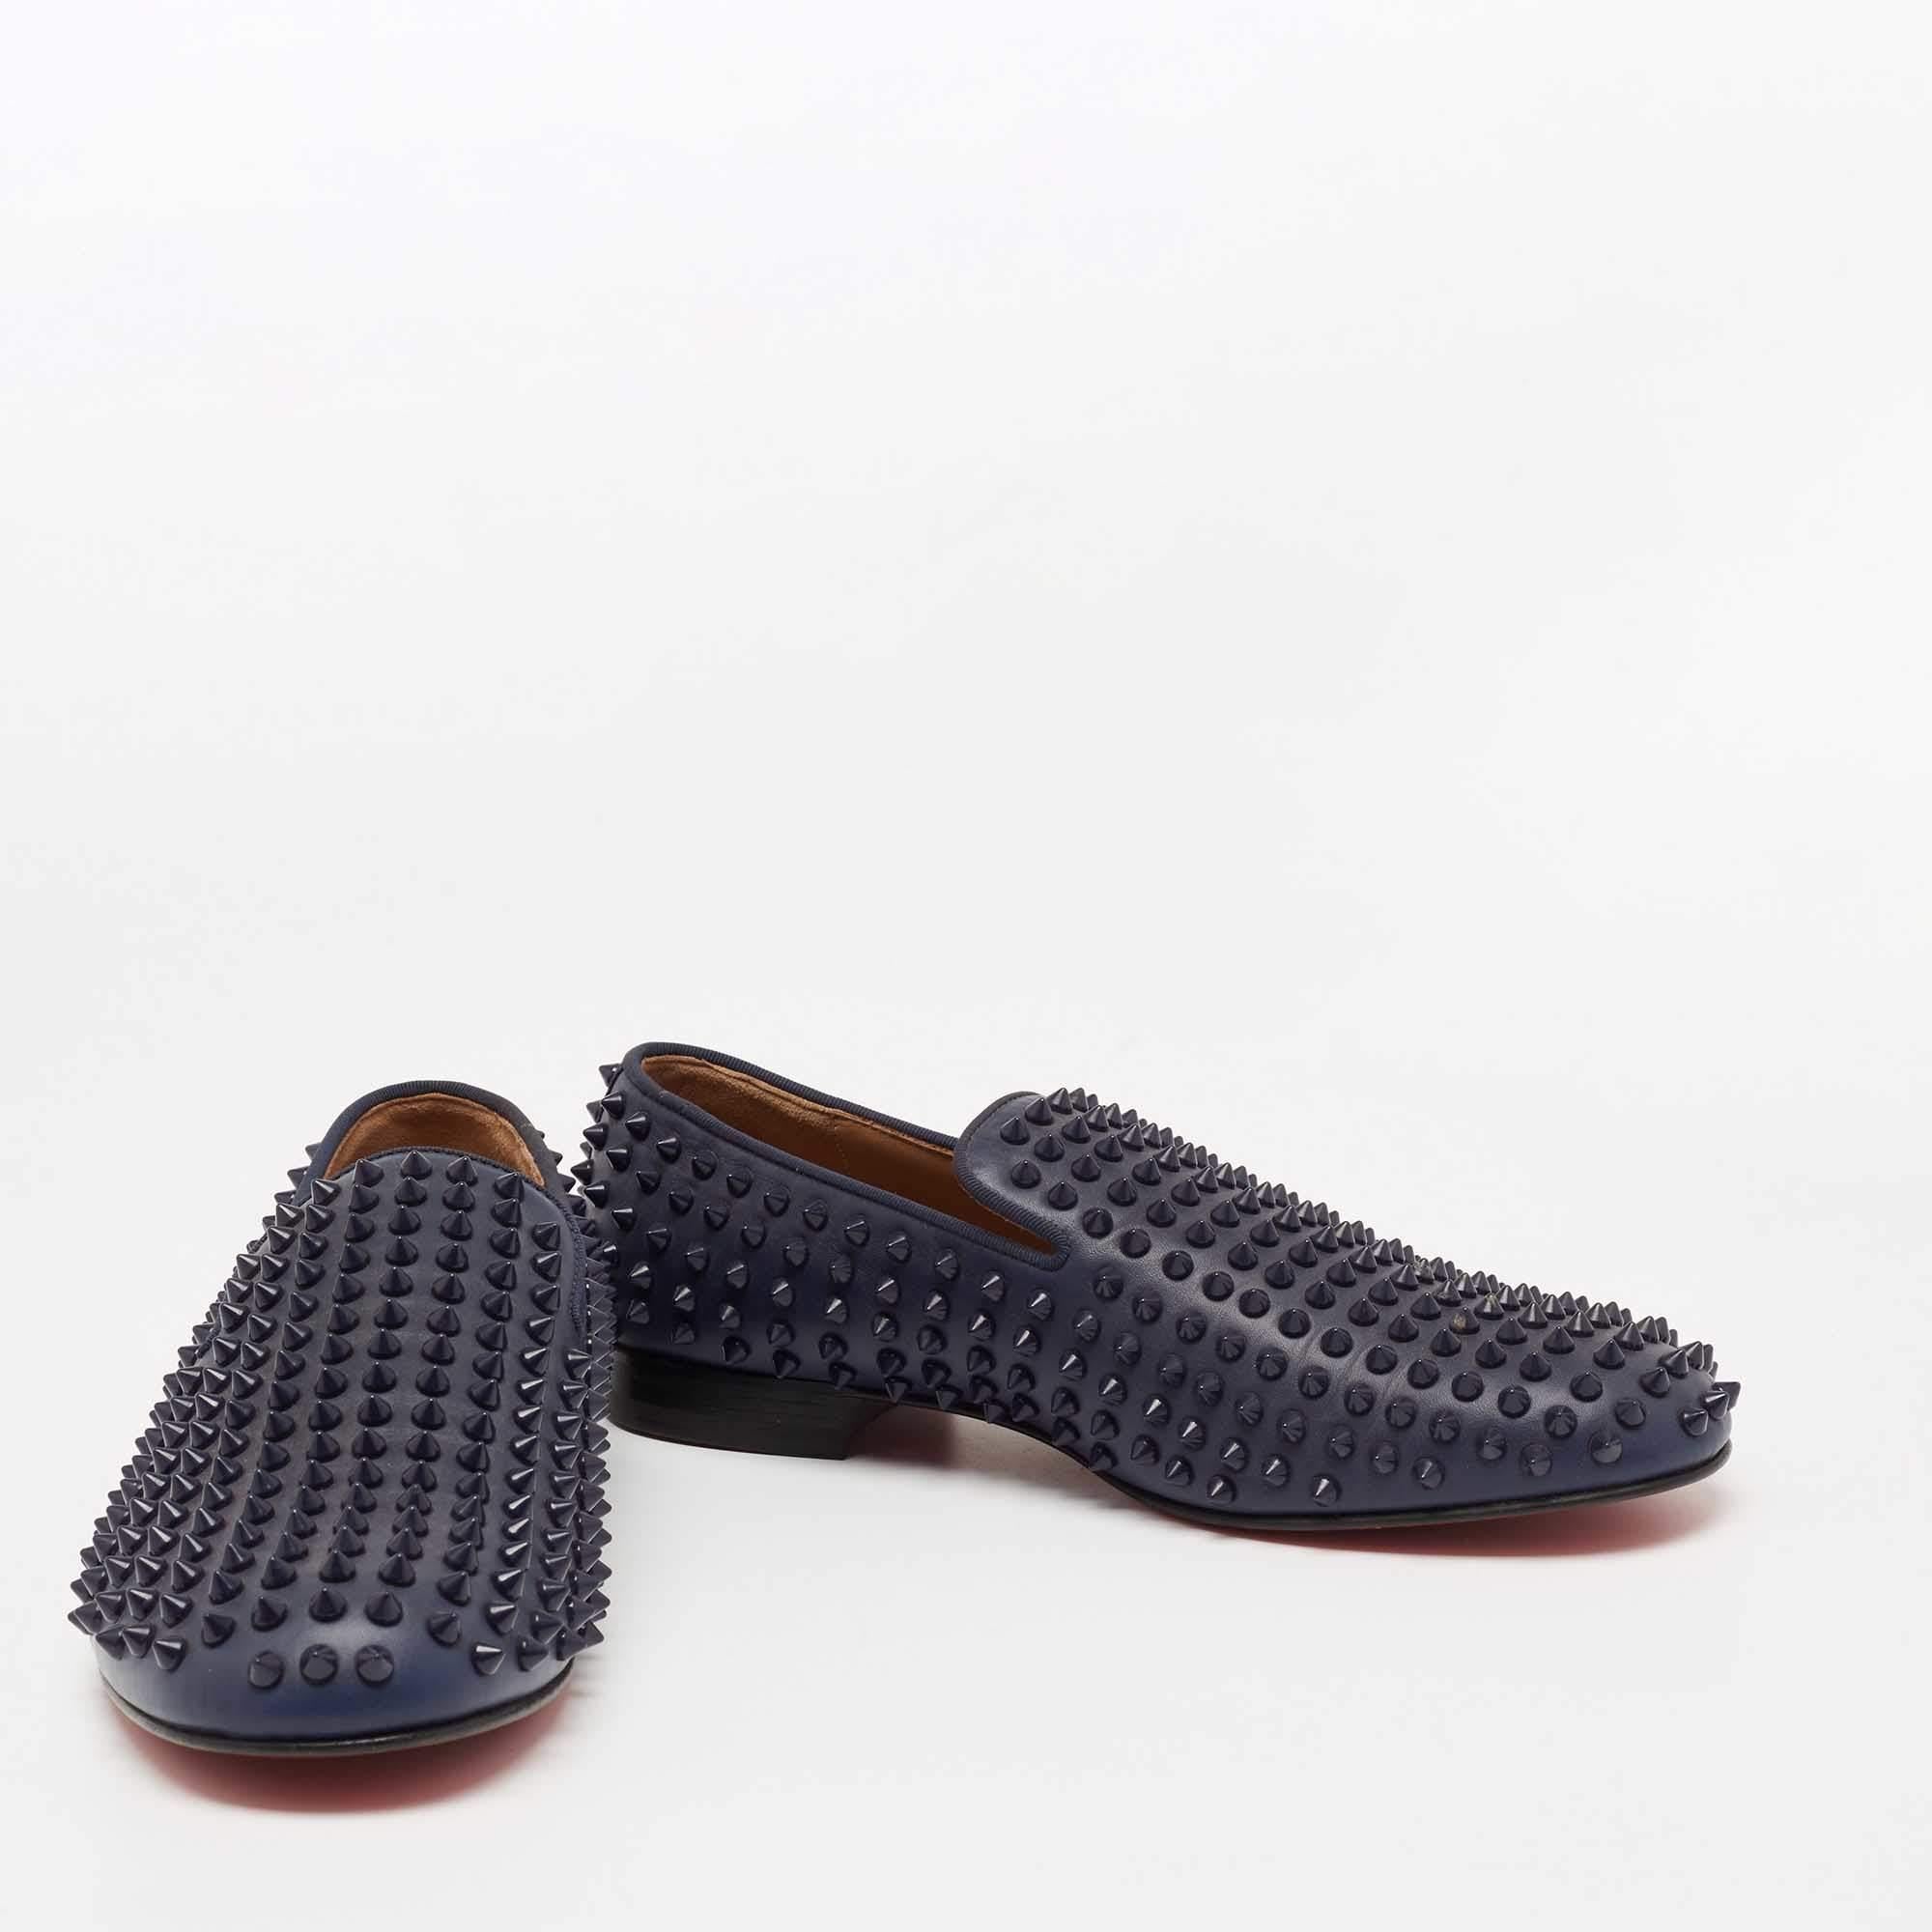 Men's Christian Louboutin Navy Blue Leather Dandelion Spike Smoking Slippers Size 40 For Sale